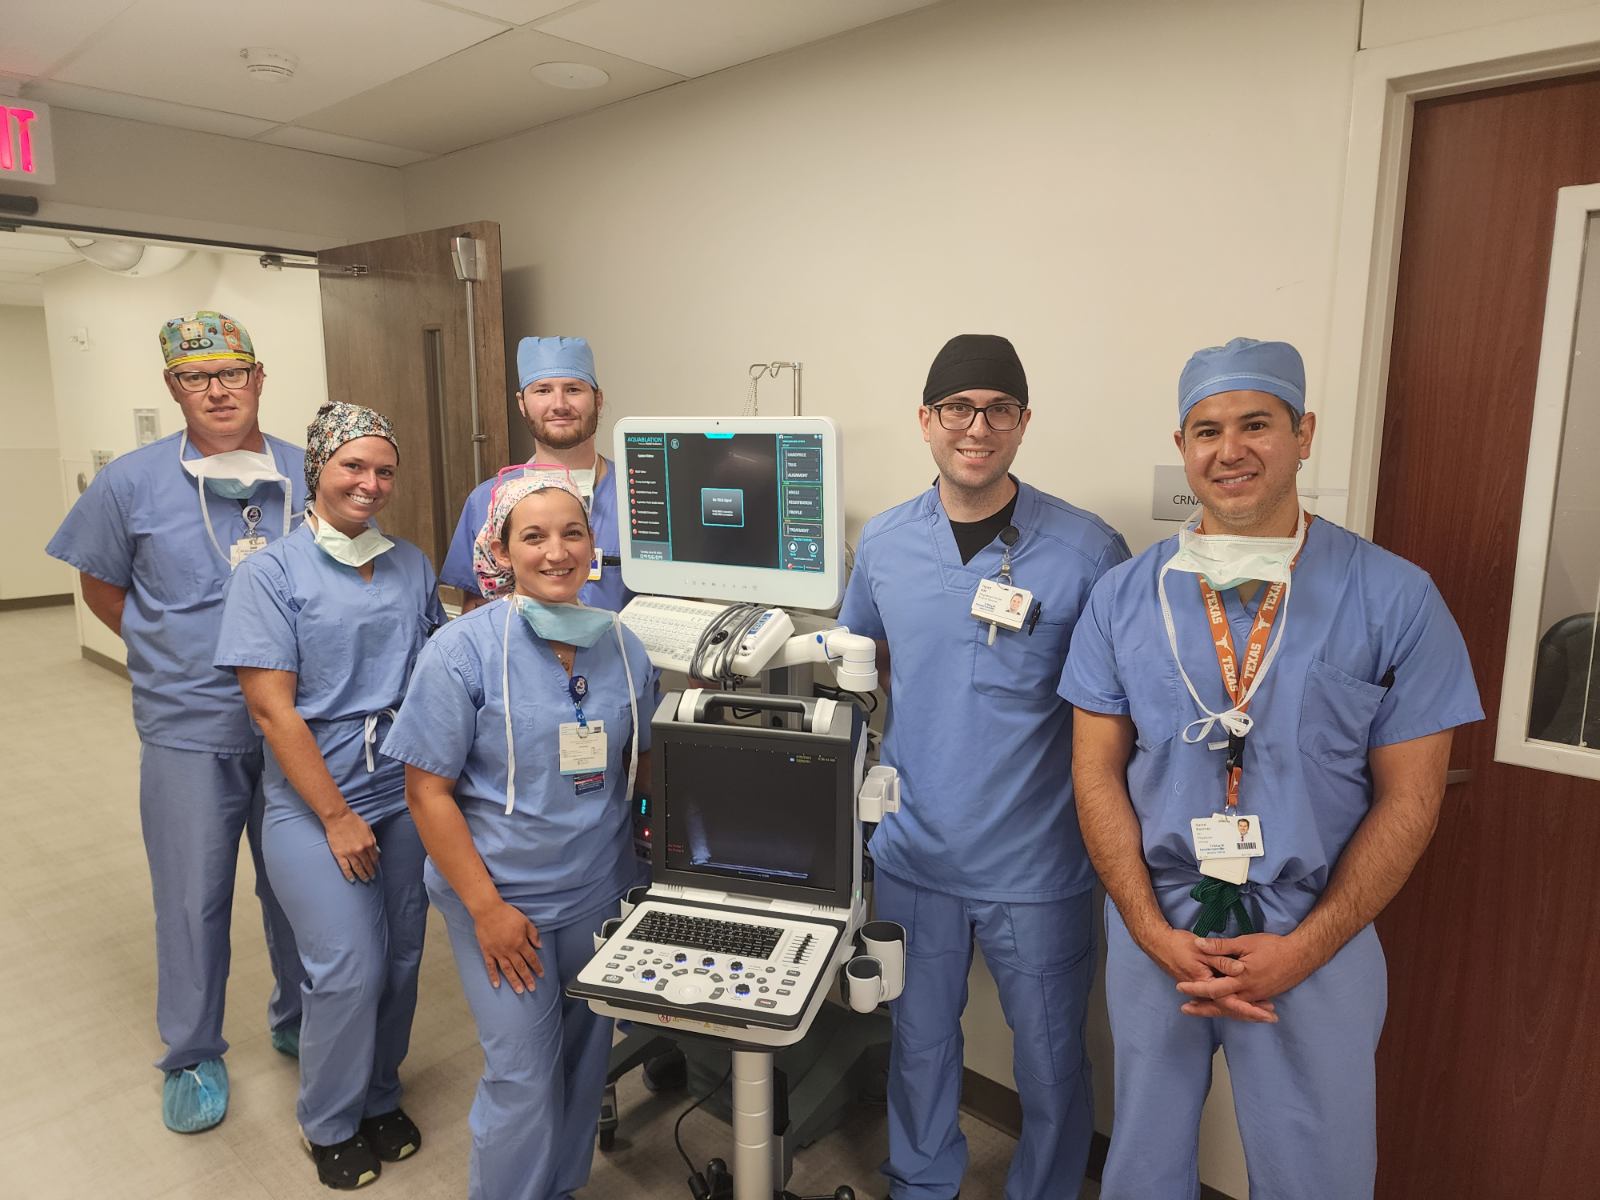 Pictured is Daniel Ramirez, MD, urologist at TriStar Hendersonville, the AquaBeamâ Robotic System and the surgical team who completed the first procedure:  Jason Powell, Sydney Cook, Hyatt Harrom, Chassity Bruce, and Caleb Krutak.